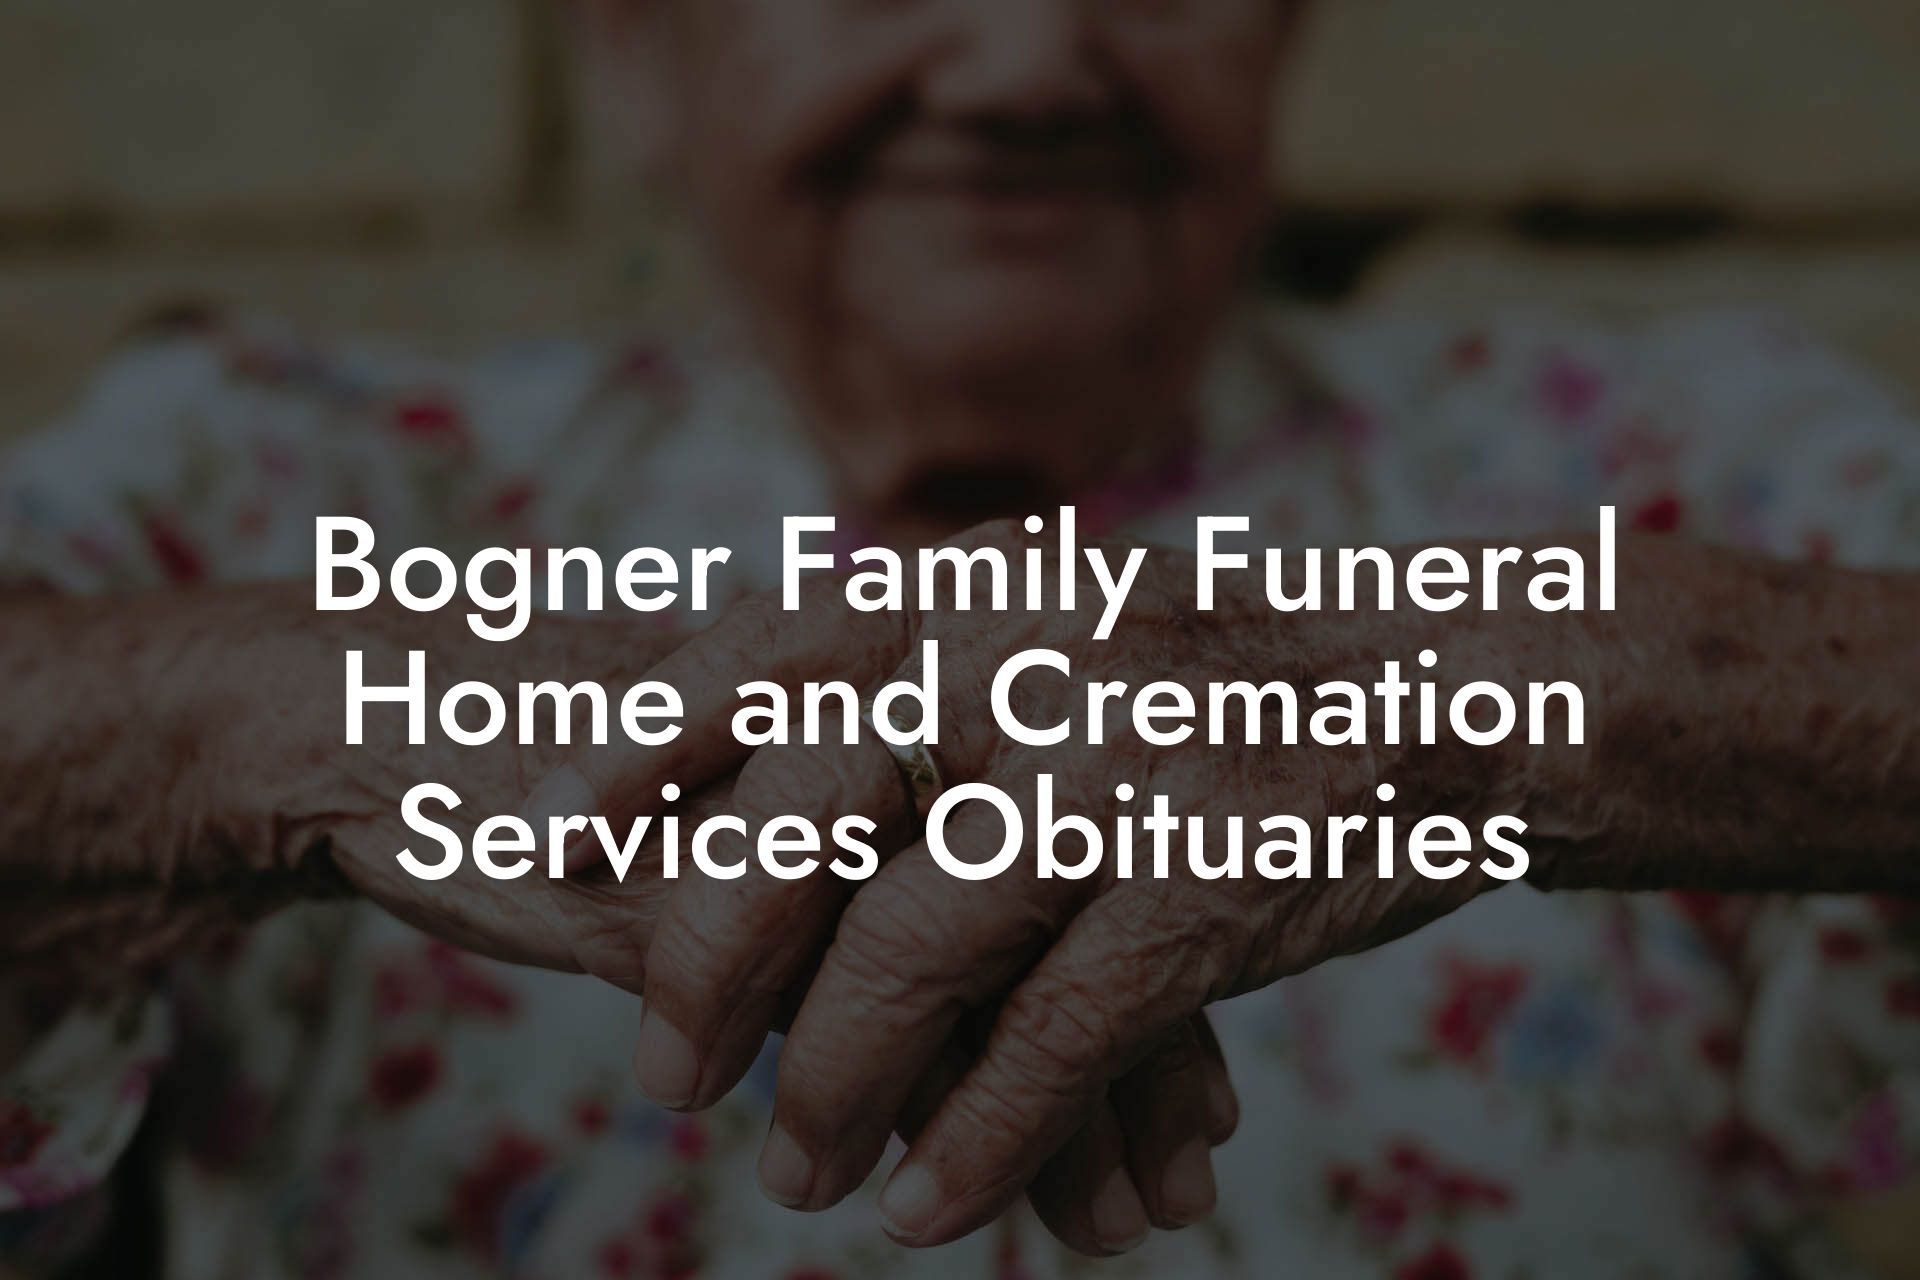 Bogner Family Funeral Home and Cremation Services Obituaries